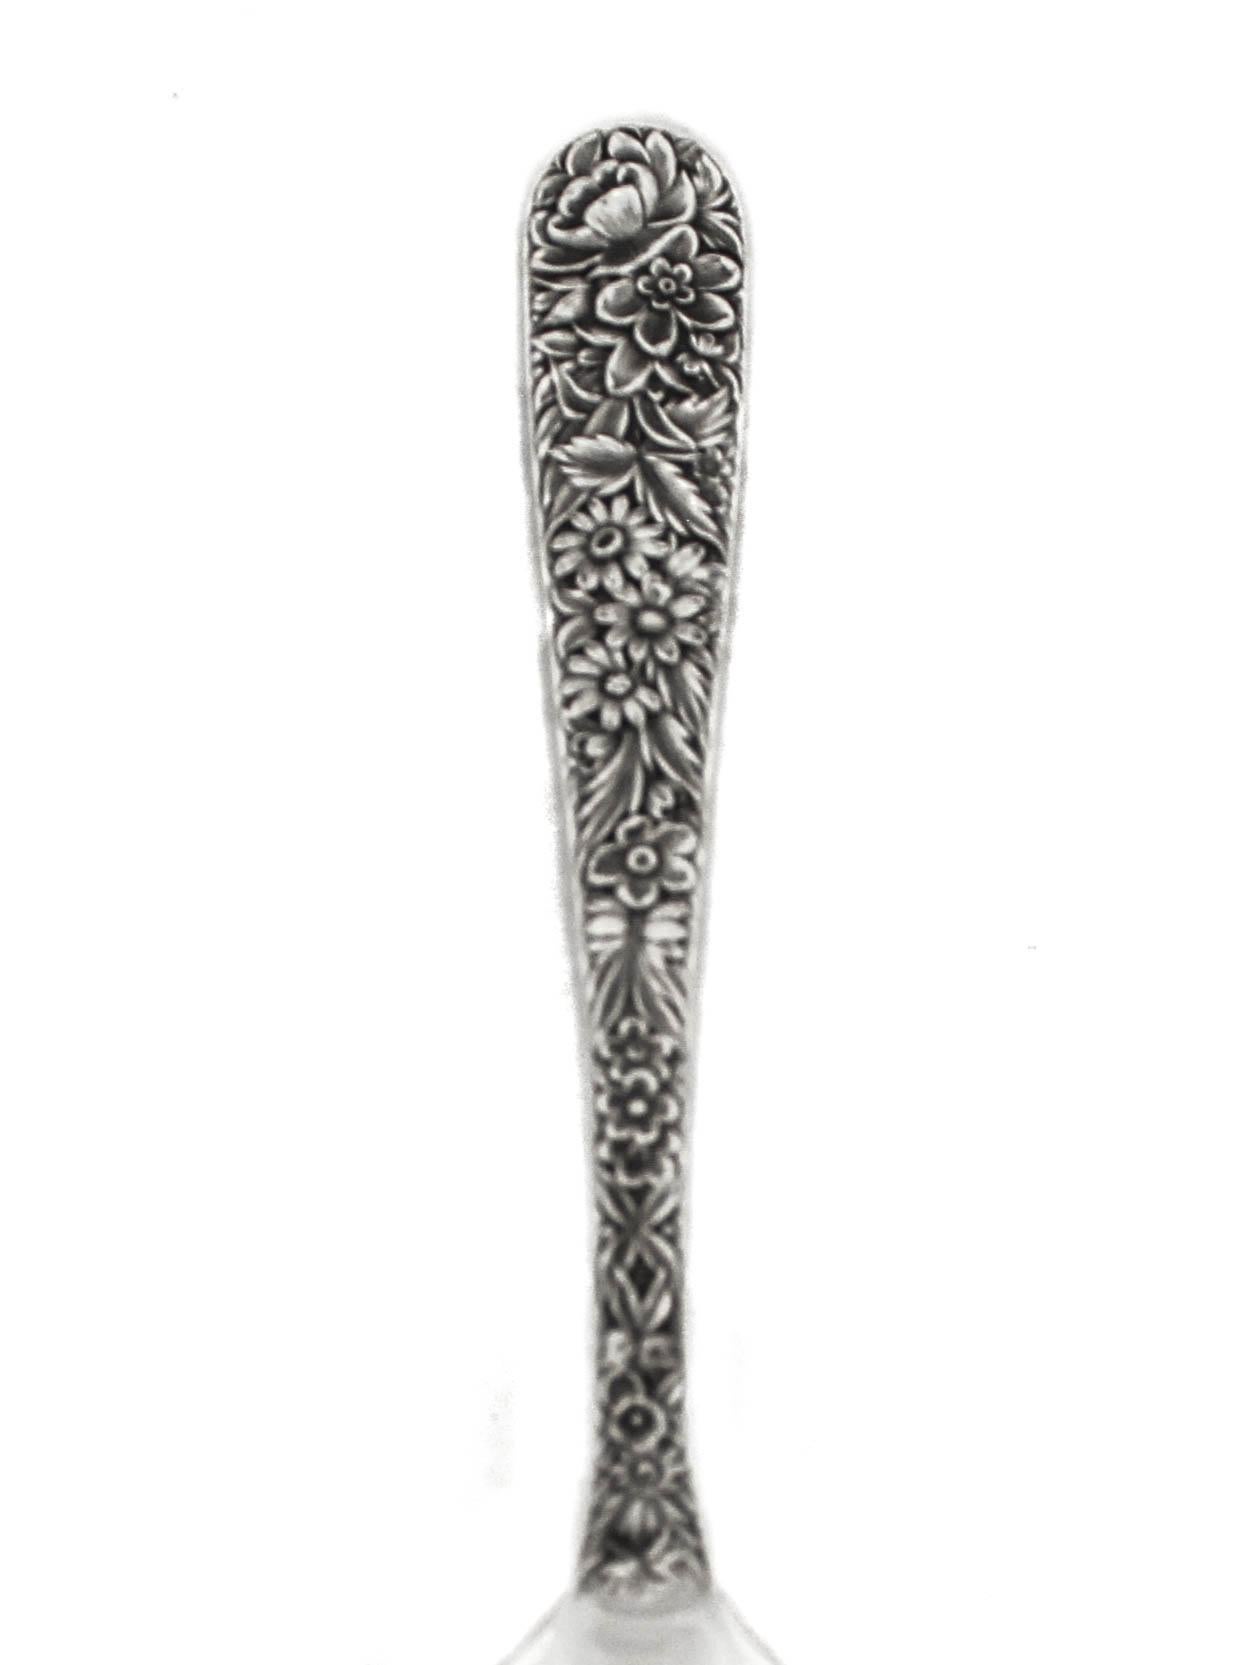 Being offered is a sterling silver serving spoon by S. Kirk and Sons in the “Forget-Me-Not” pattern, 1910.  A gorgeous floral motif of  daises, roses and leaves decorates the entire length of the handle.  The Kirk / Steiff Company of Baltimore was